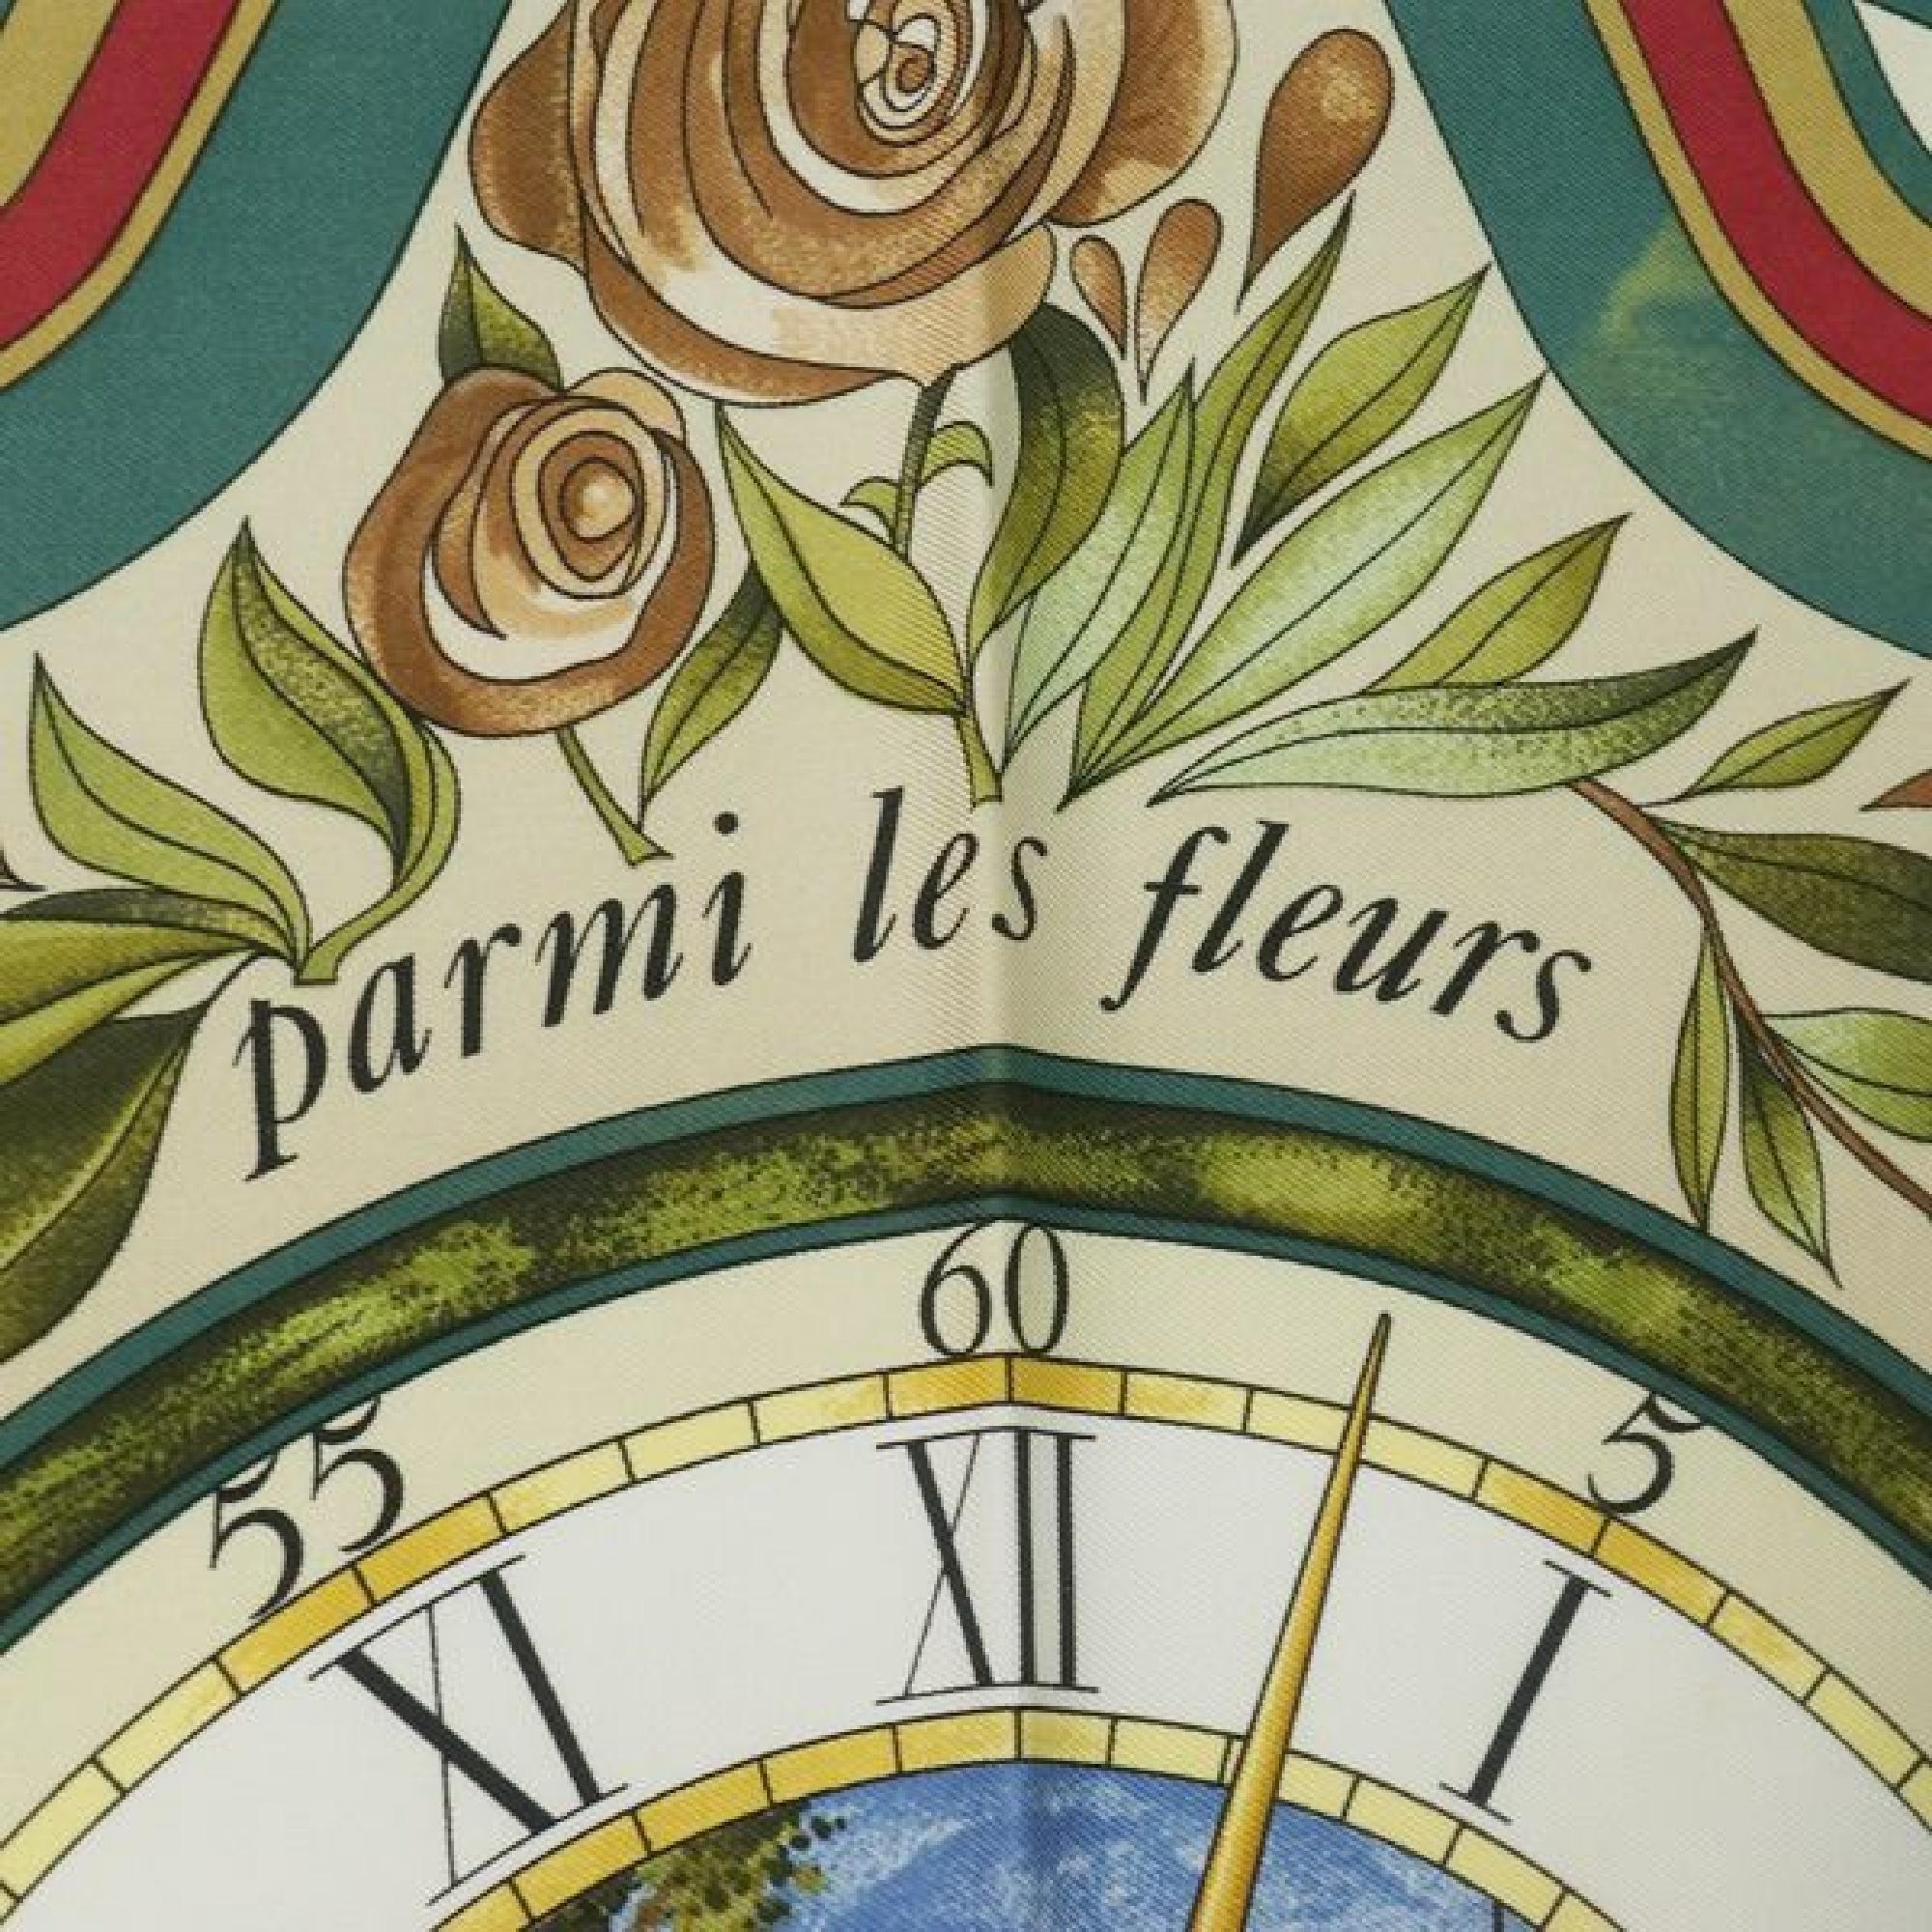 An authentic HERMES Time spent among the flowers Carre90 parmi les fleurs je compt Womens sca. The color is Green. The outside material is Silk. The pattern is Carre90 parmi les fleurs je compt.
Rank
AB signs of wear (Small)
Used goods in good